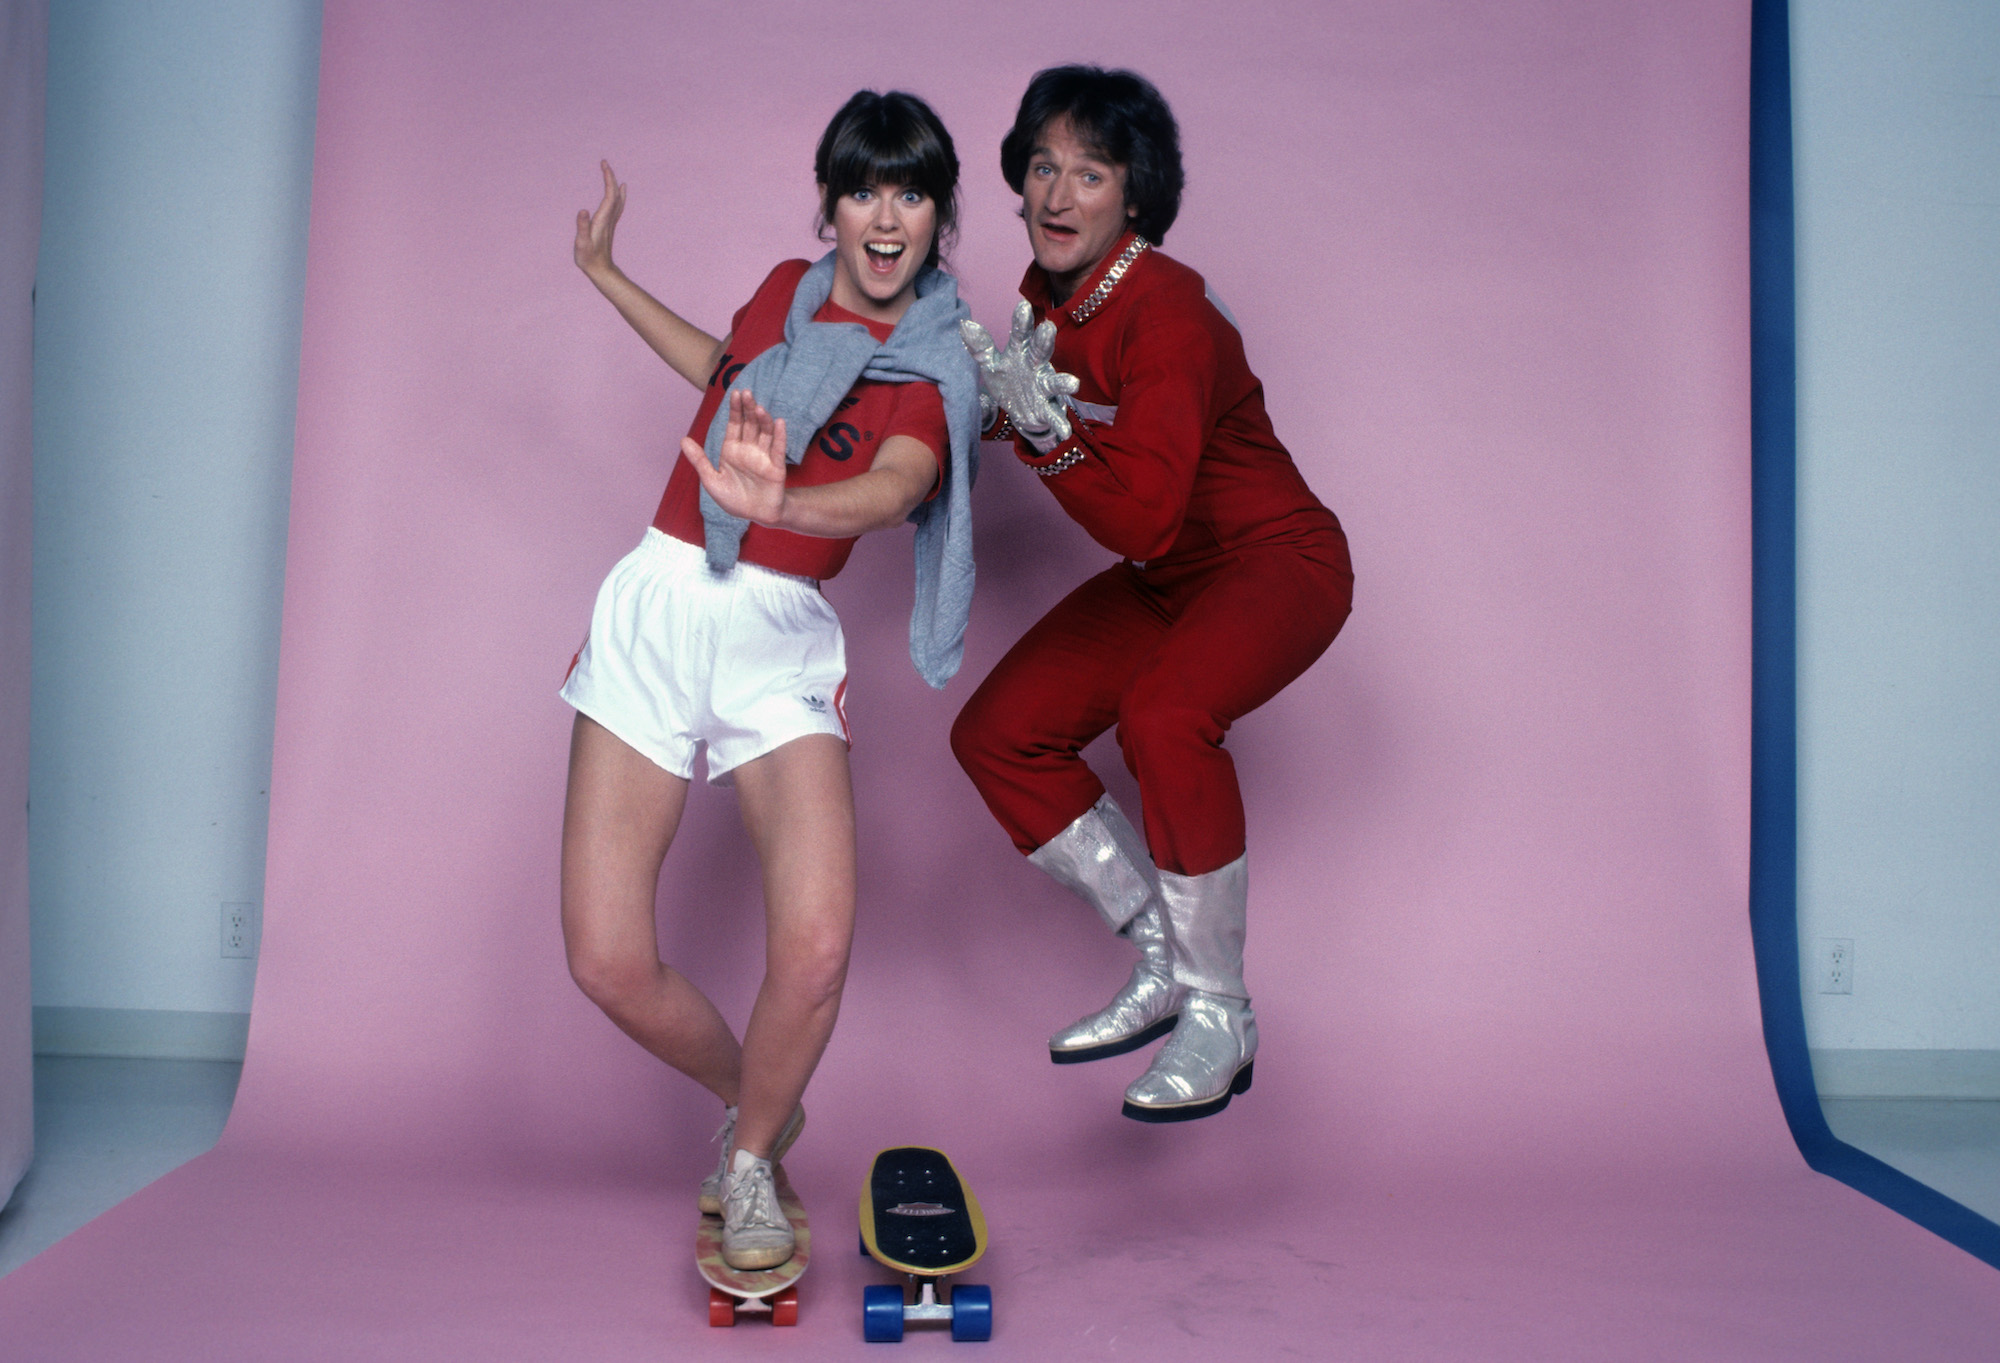 (L-R) Pam Dawber as Mindy McConnell and Robin Williams as Mork smiling in front of a pink background